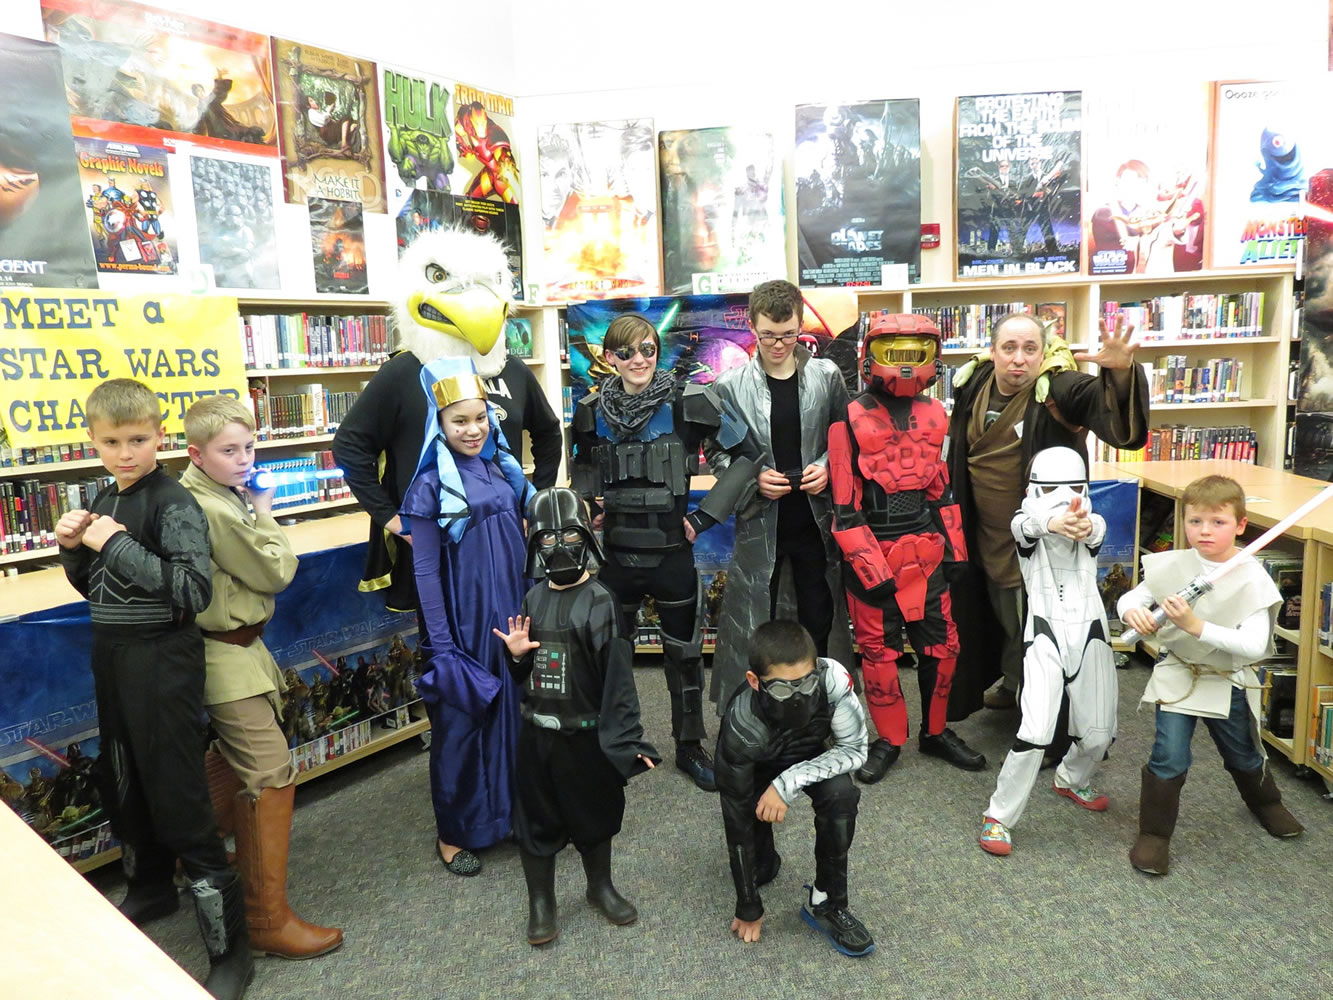 East Vancouver: Shahala Middle School hosted its third annual Sci-Fi Fantasy Family Night, a fundraiser that's part book fair and part costume contest.